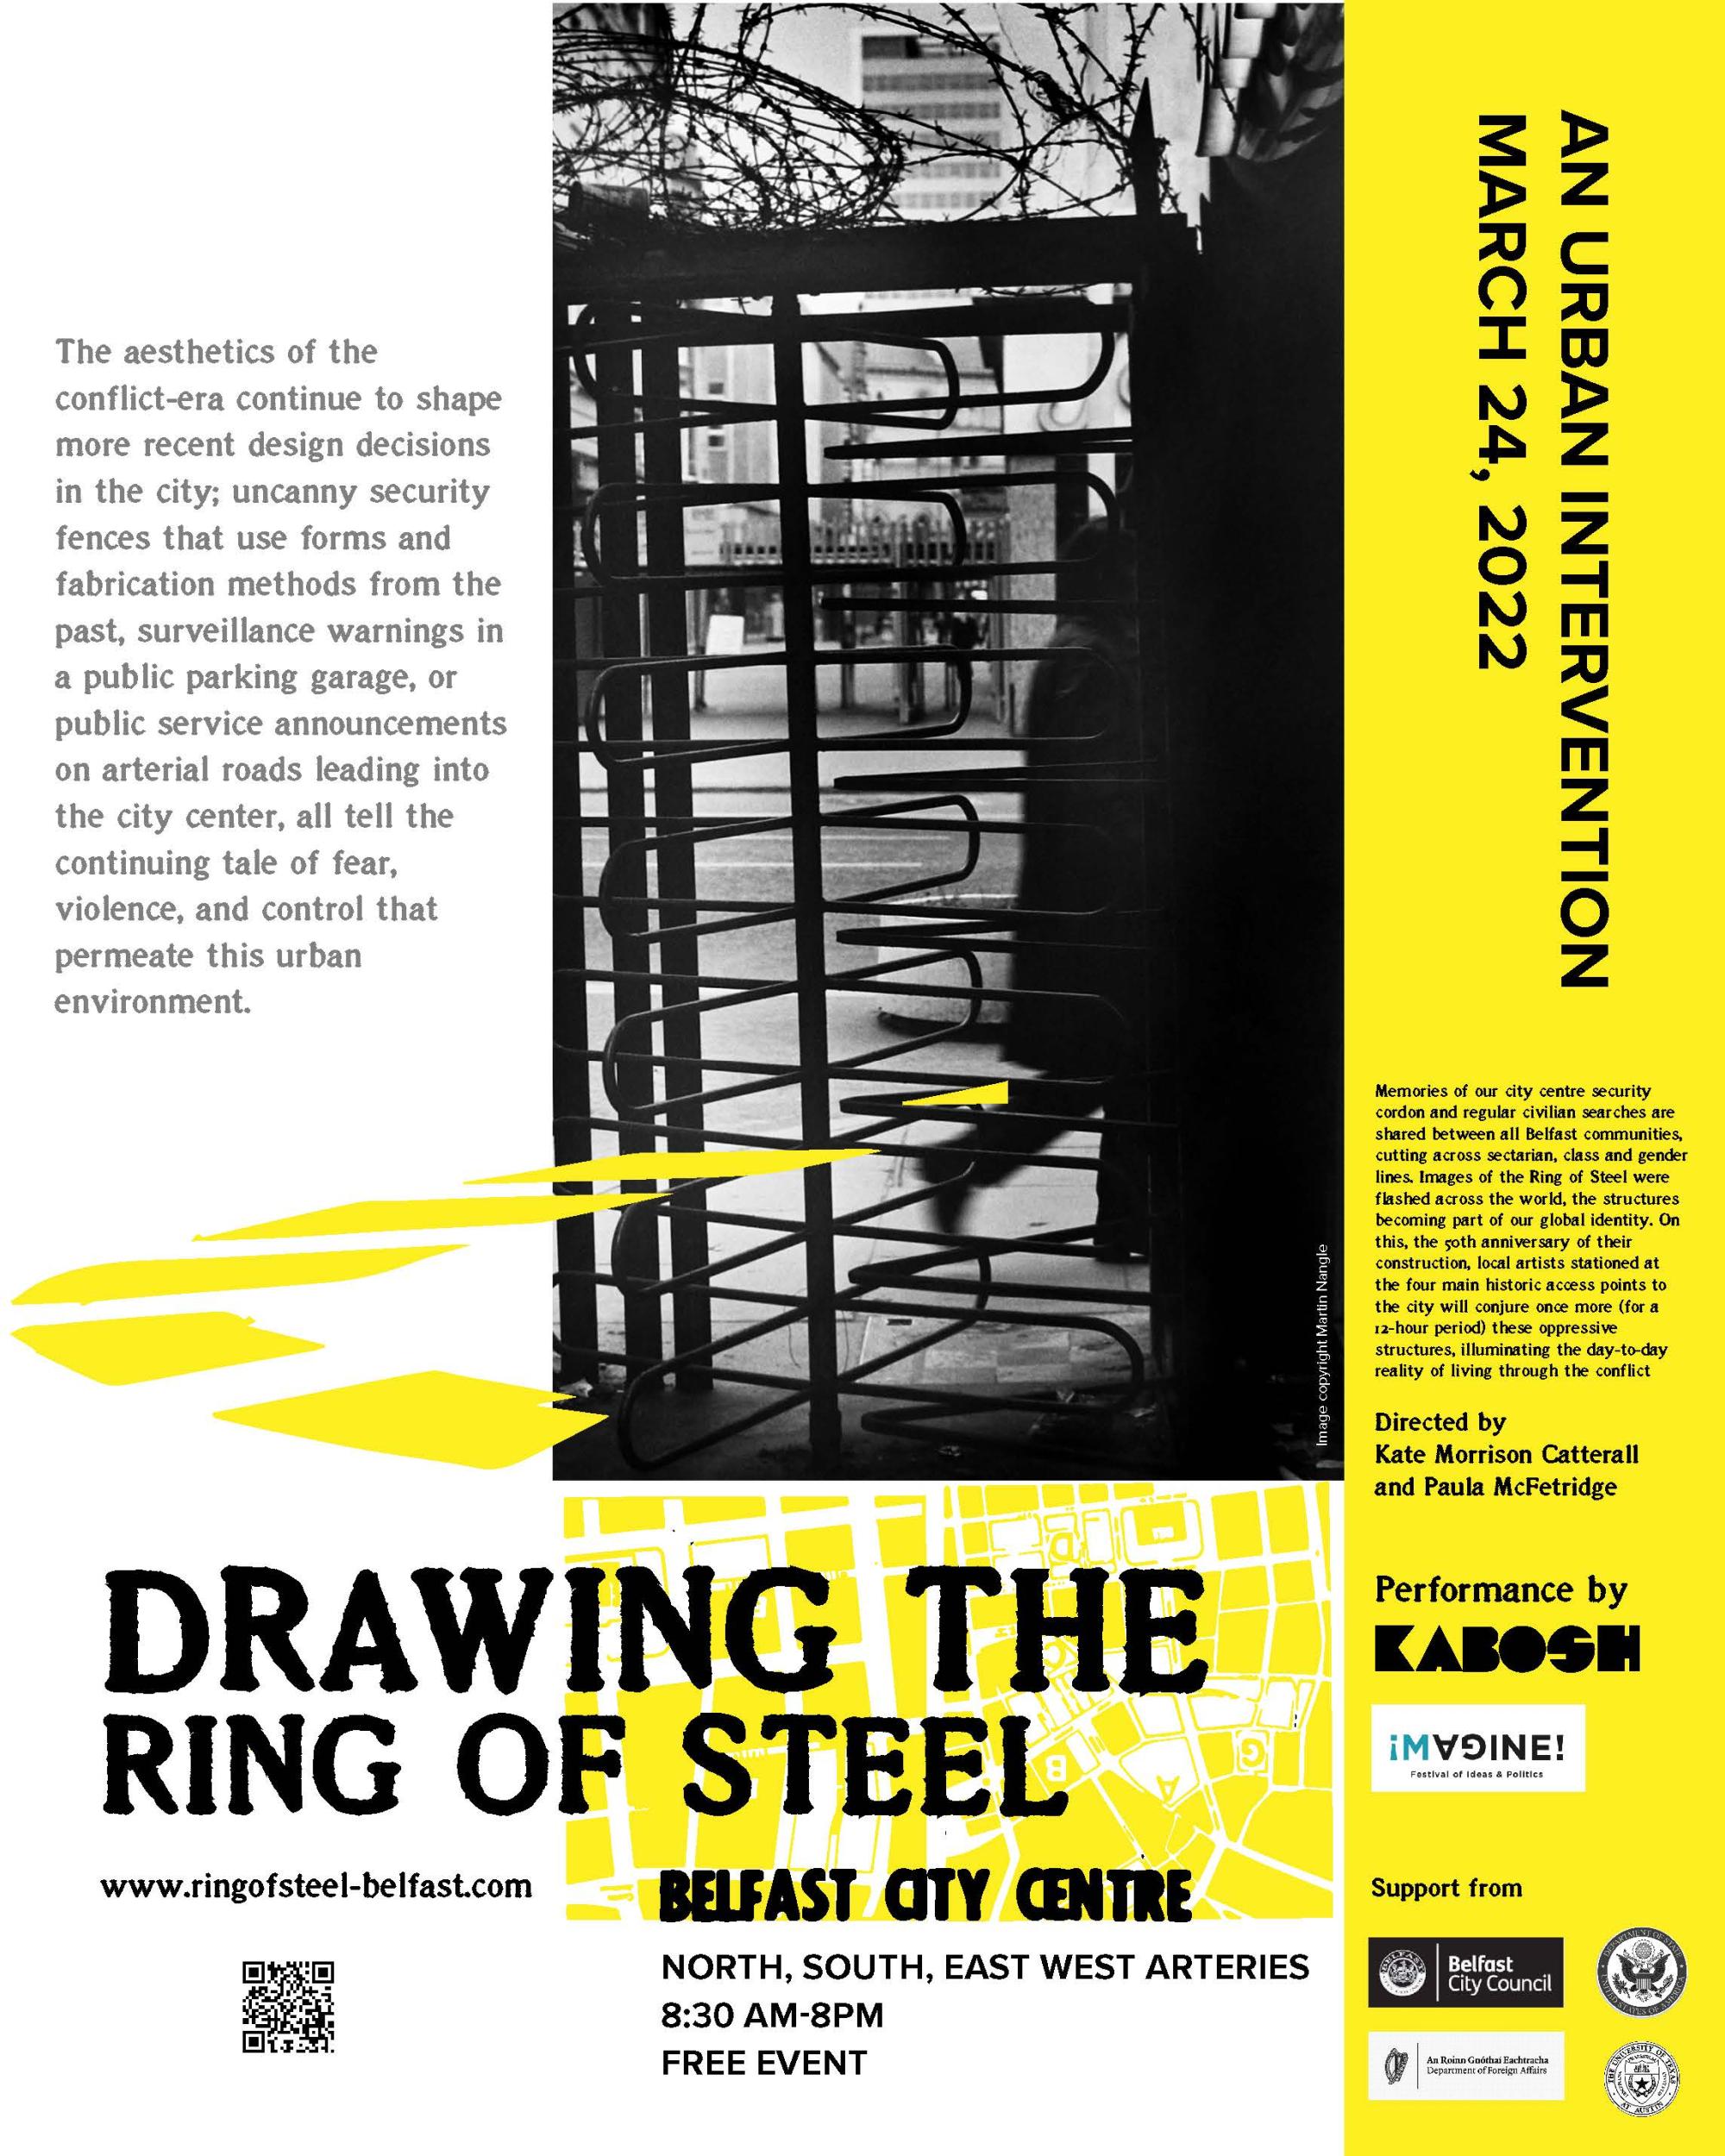 Poster for the Drawing of the Ring of Steel event